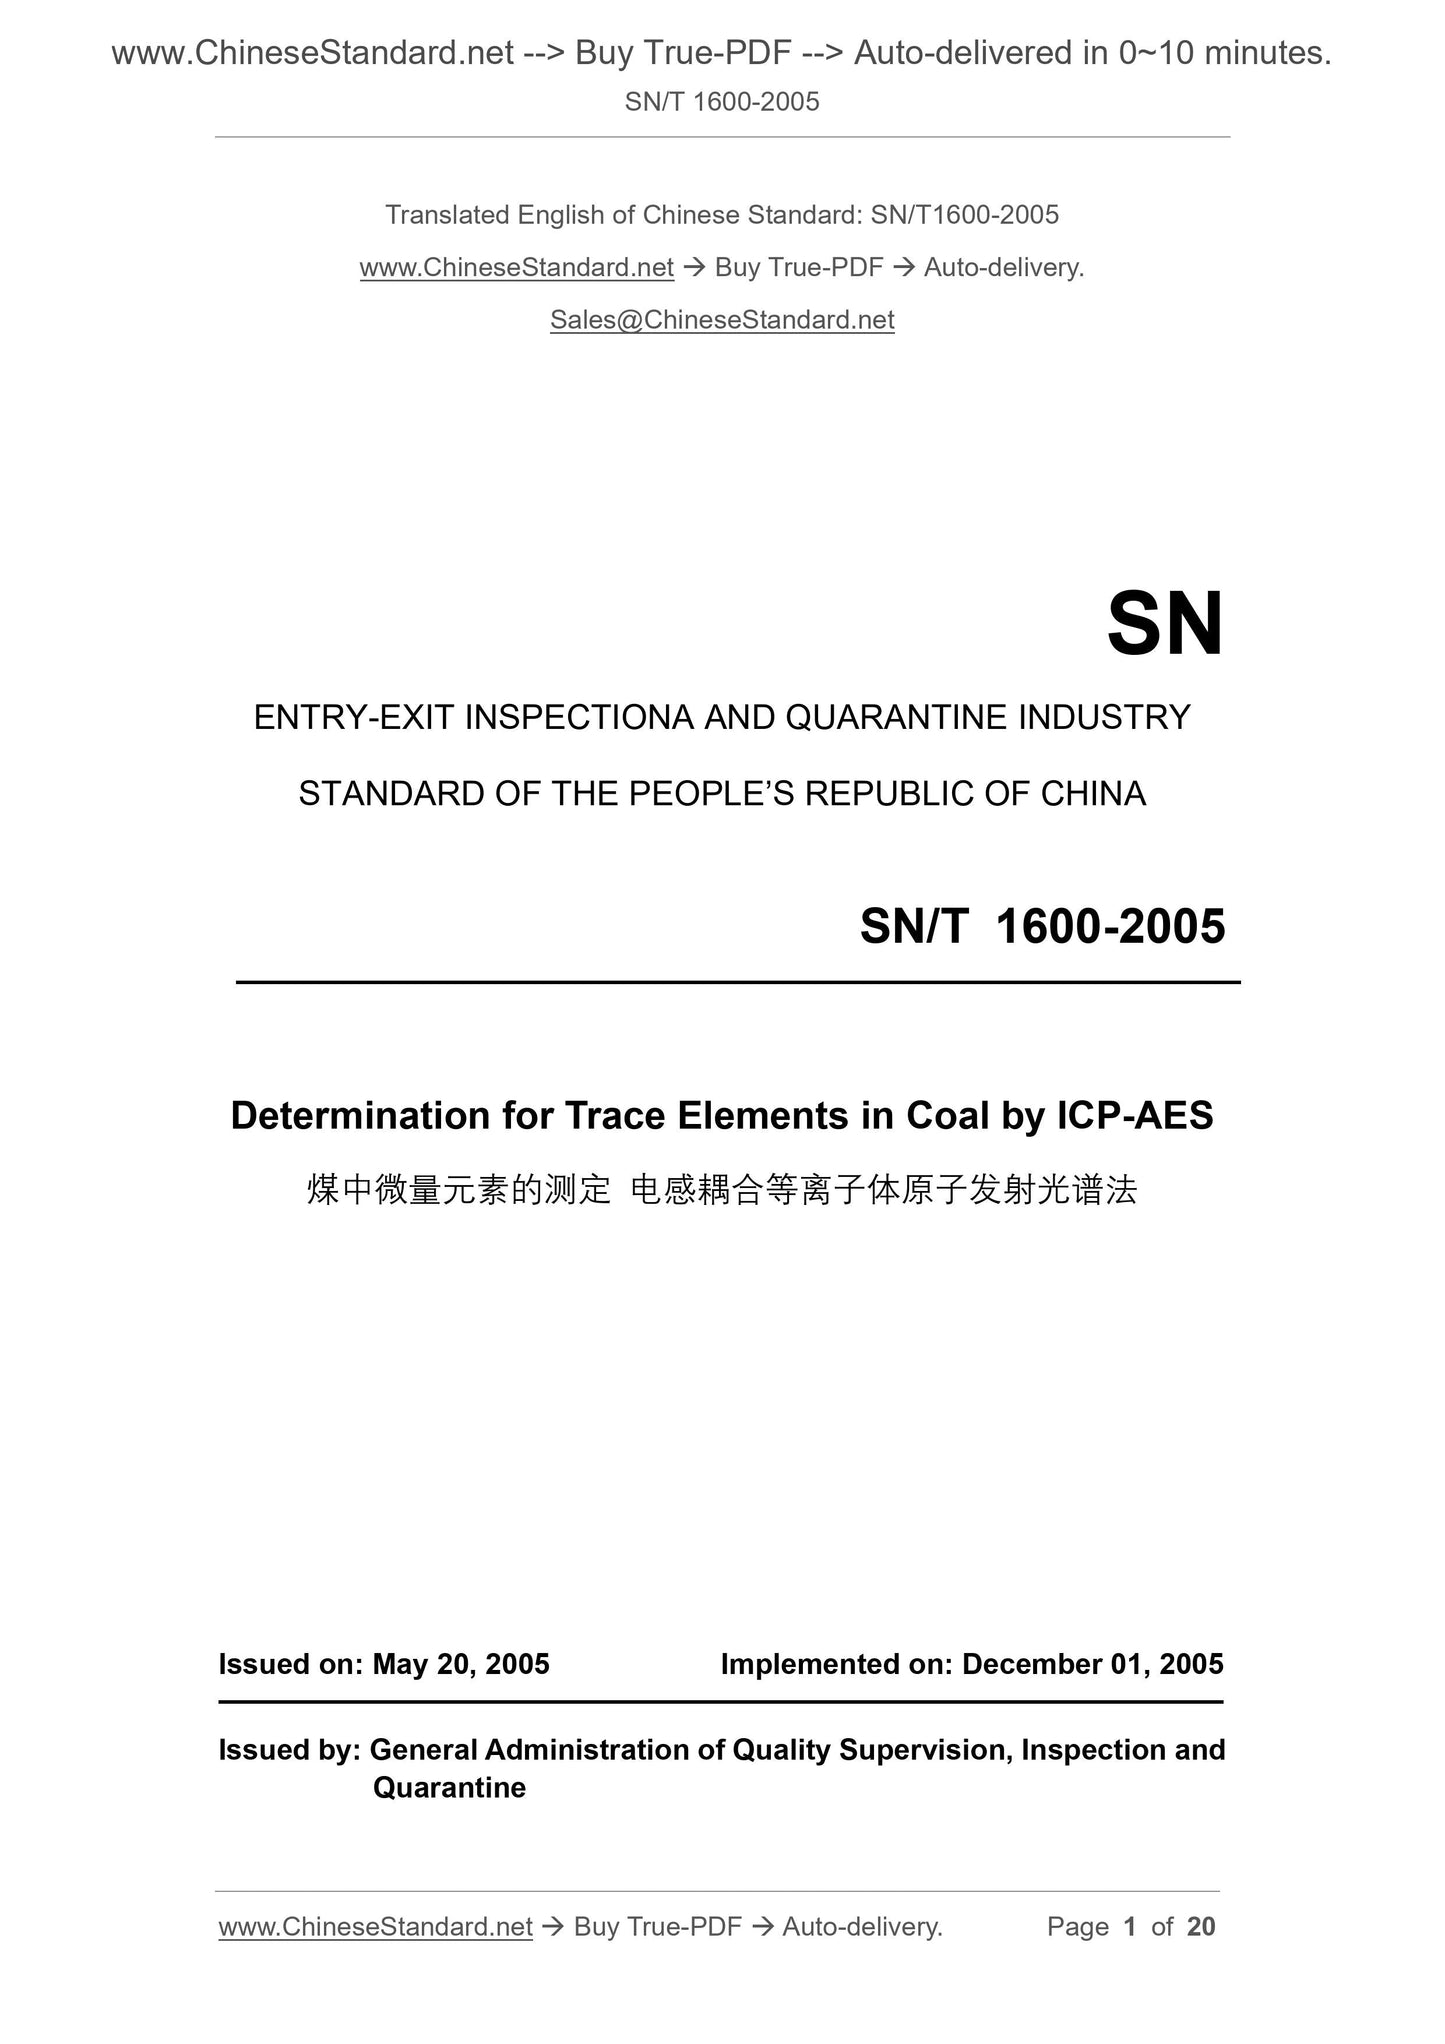 SN/T 1600-2005 Page 1